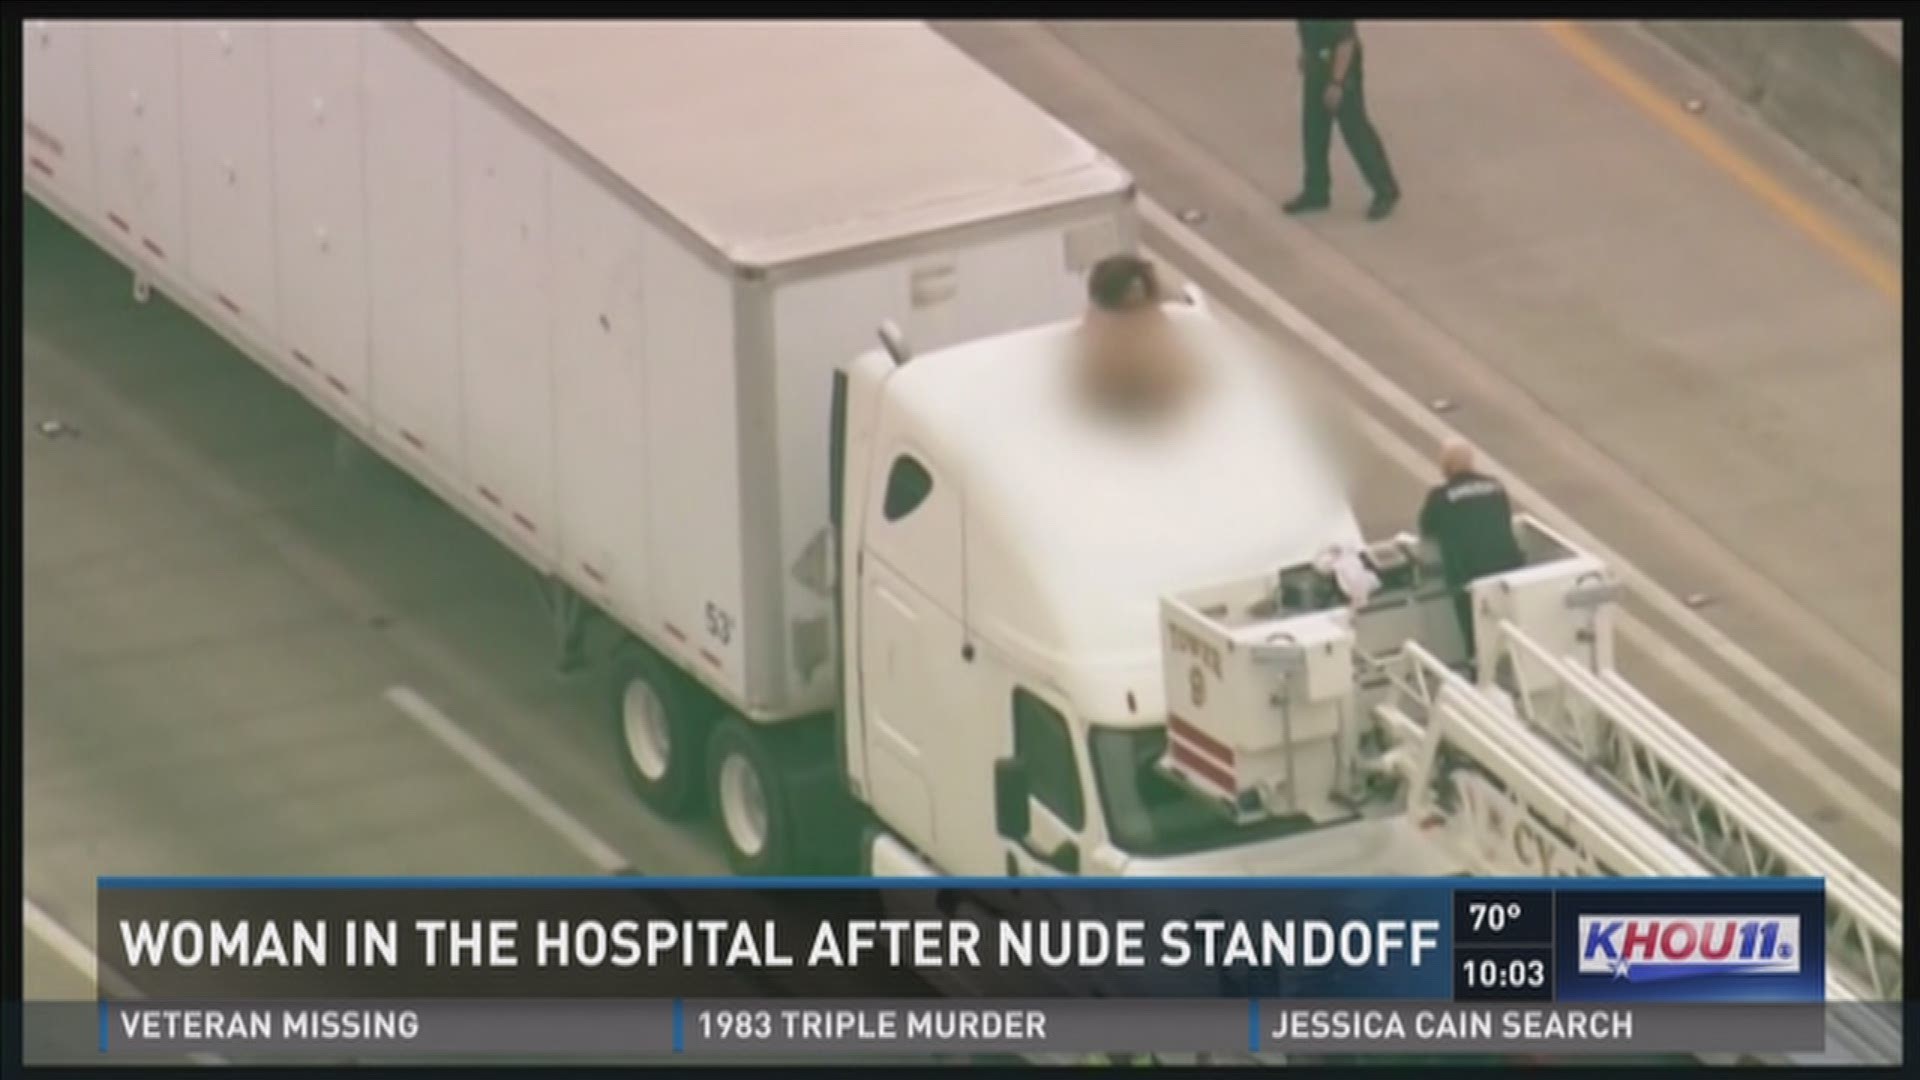 The woman stripped down naked and climbed on top of an 18-wheeler, halting rush hour traffic for two hours.